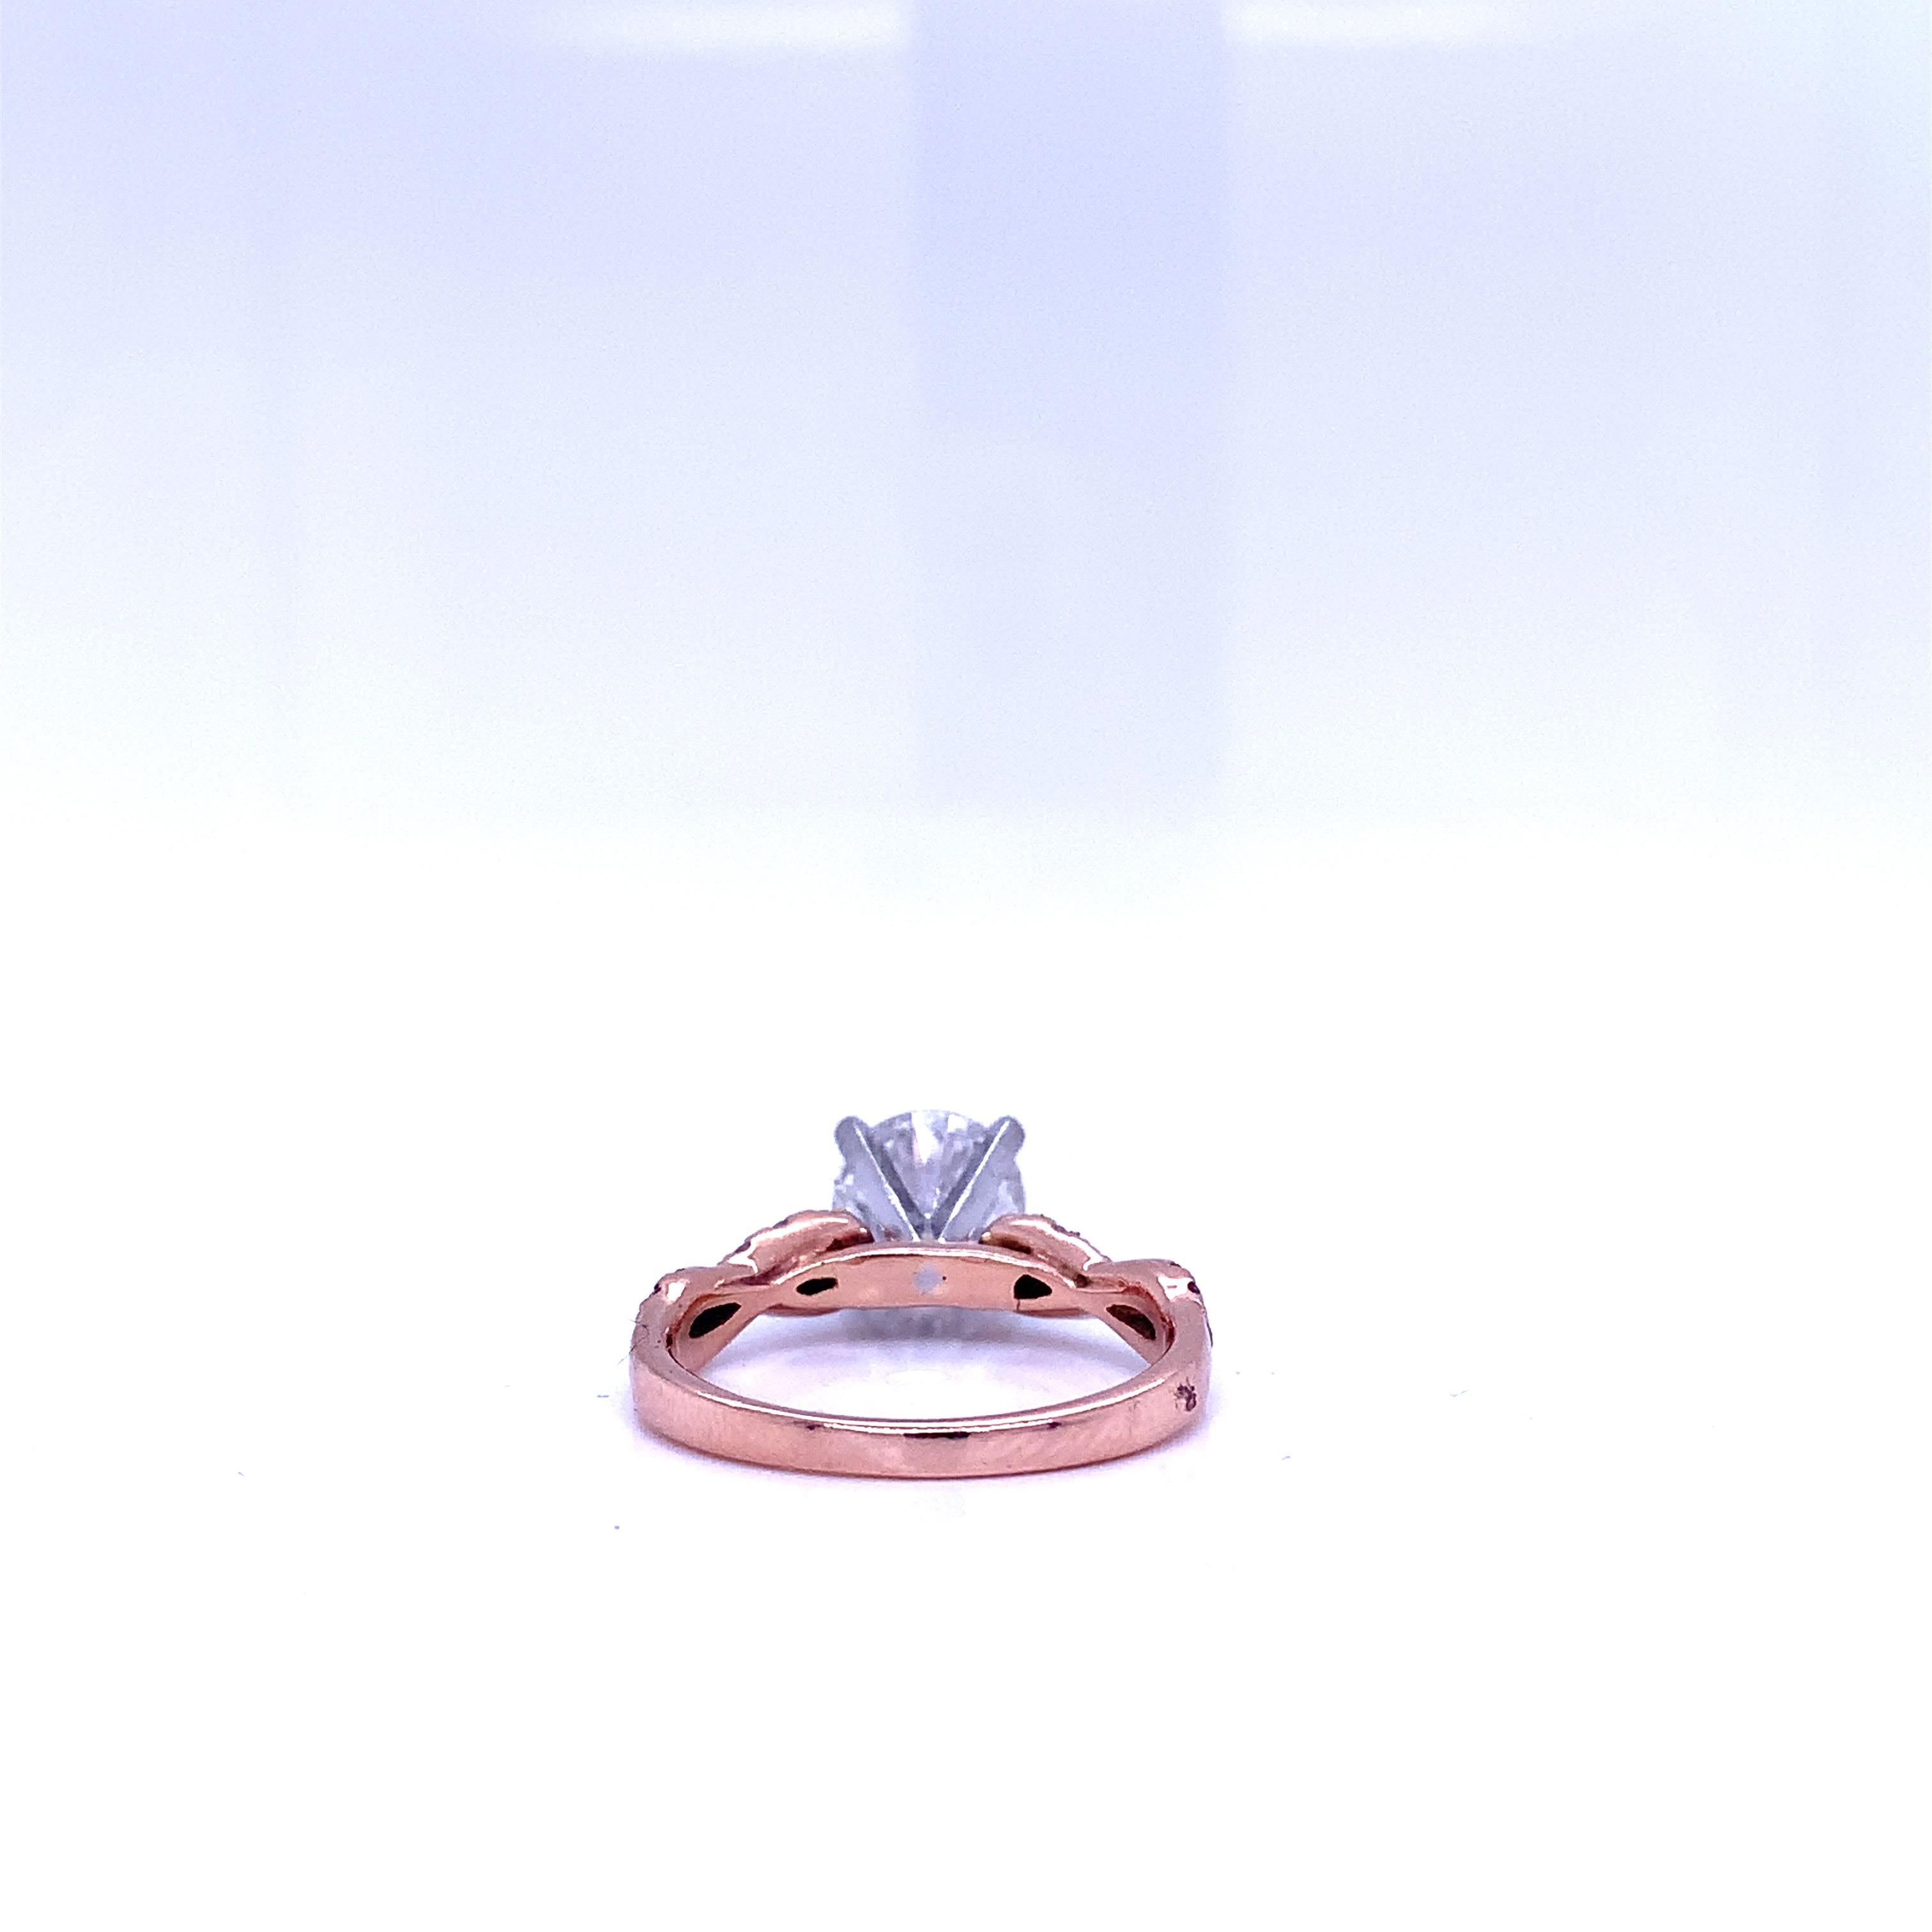 Round Cut Diamond 2.08 Carat Ring Set in 14k Rose Gold In Excellent Condition For Sale In Aventura, FL